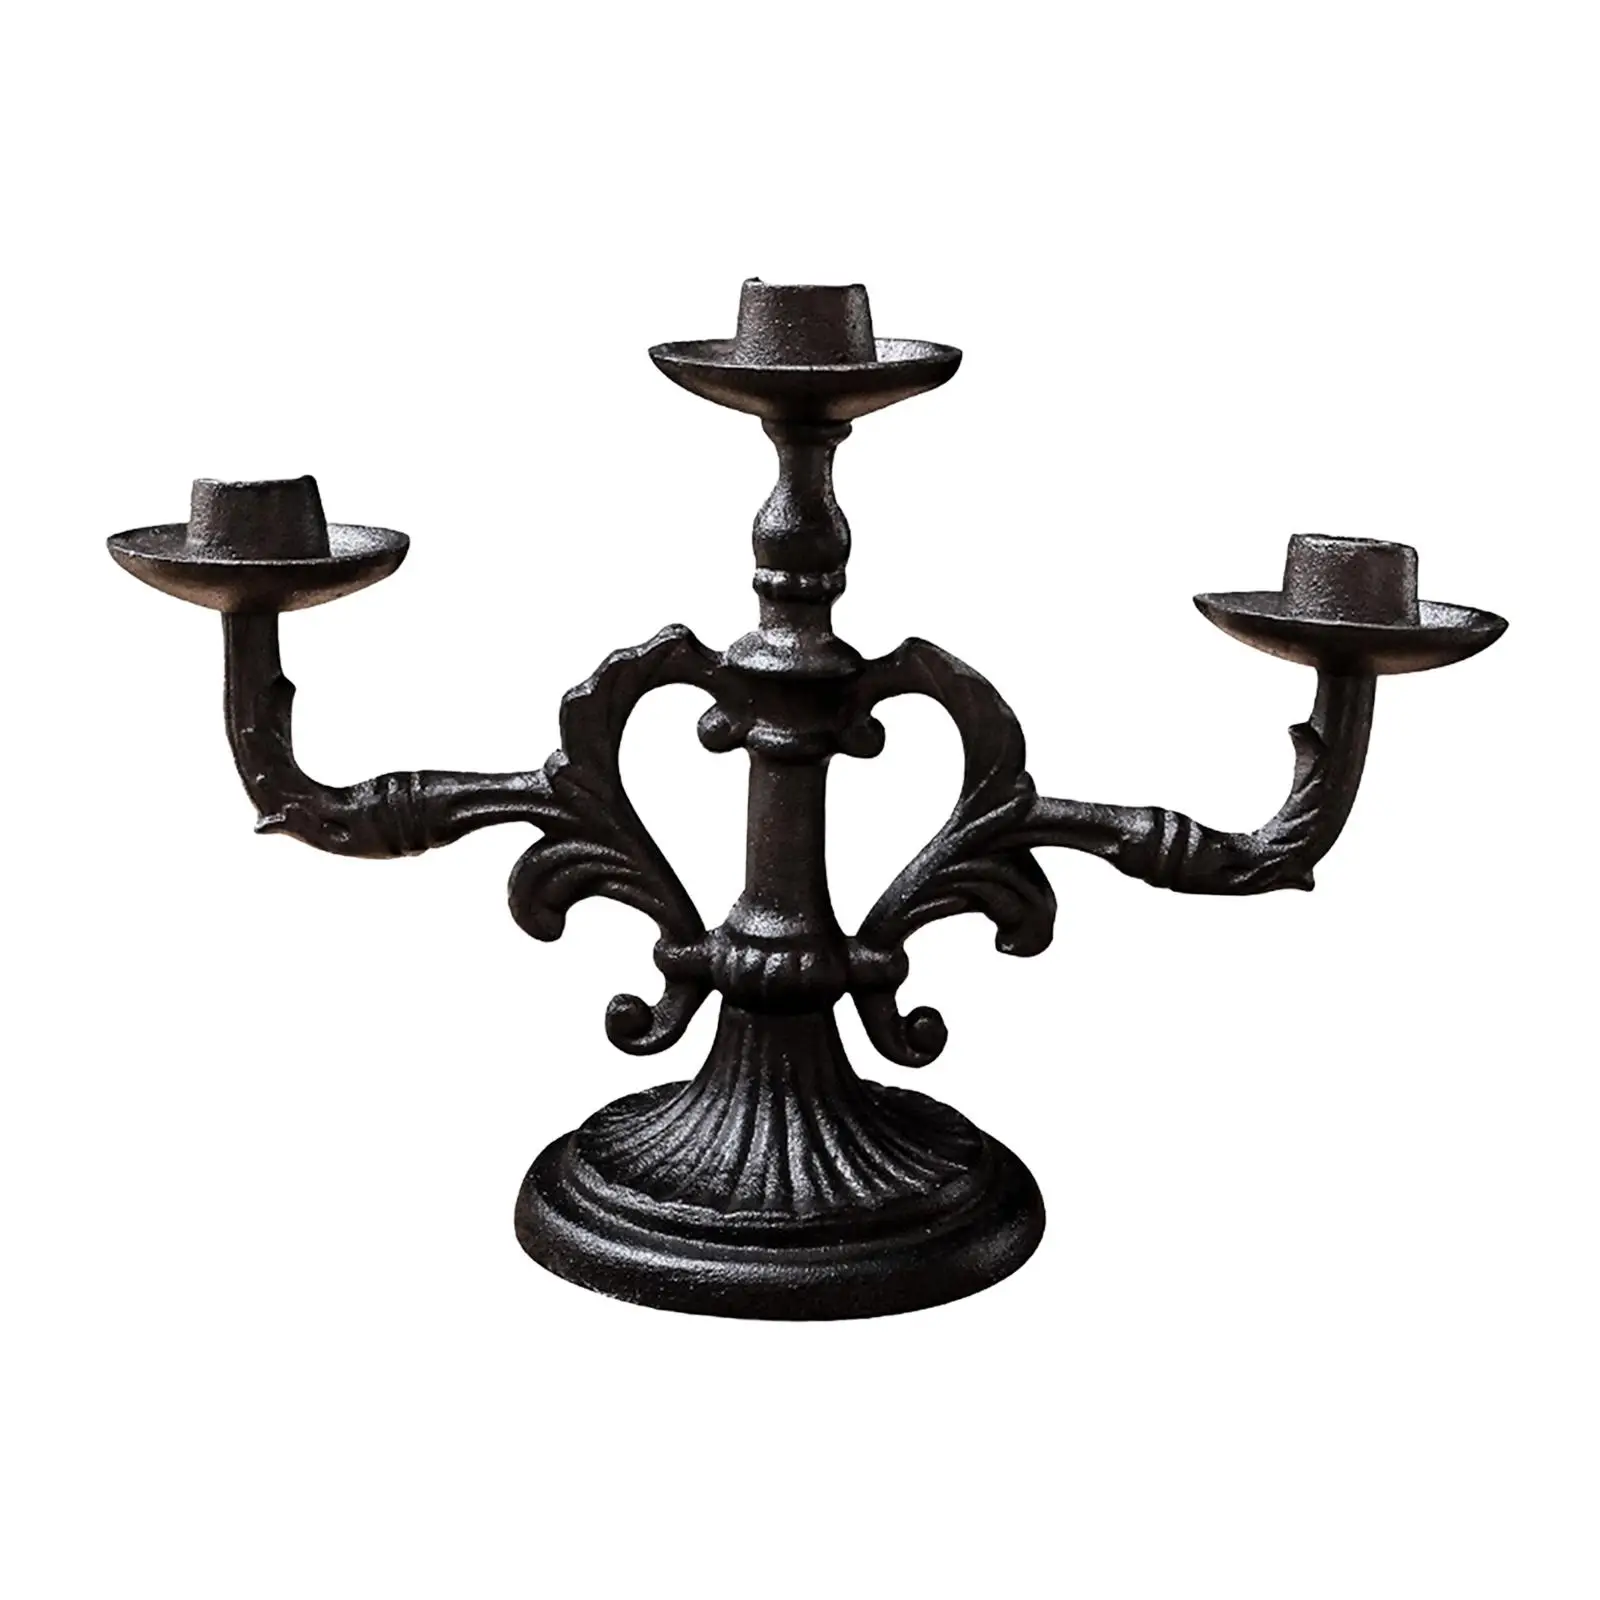 Nordic Candlestick Holders Iron Candle Holder for Home Decor Holiday Table Centerpiece Housewarming Gift